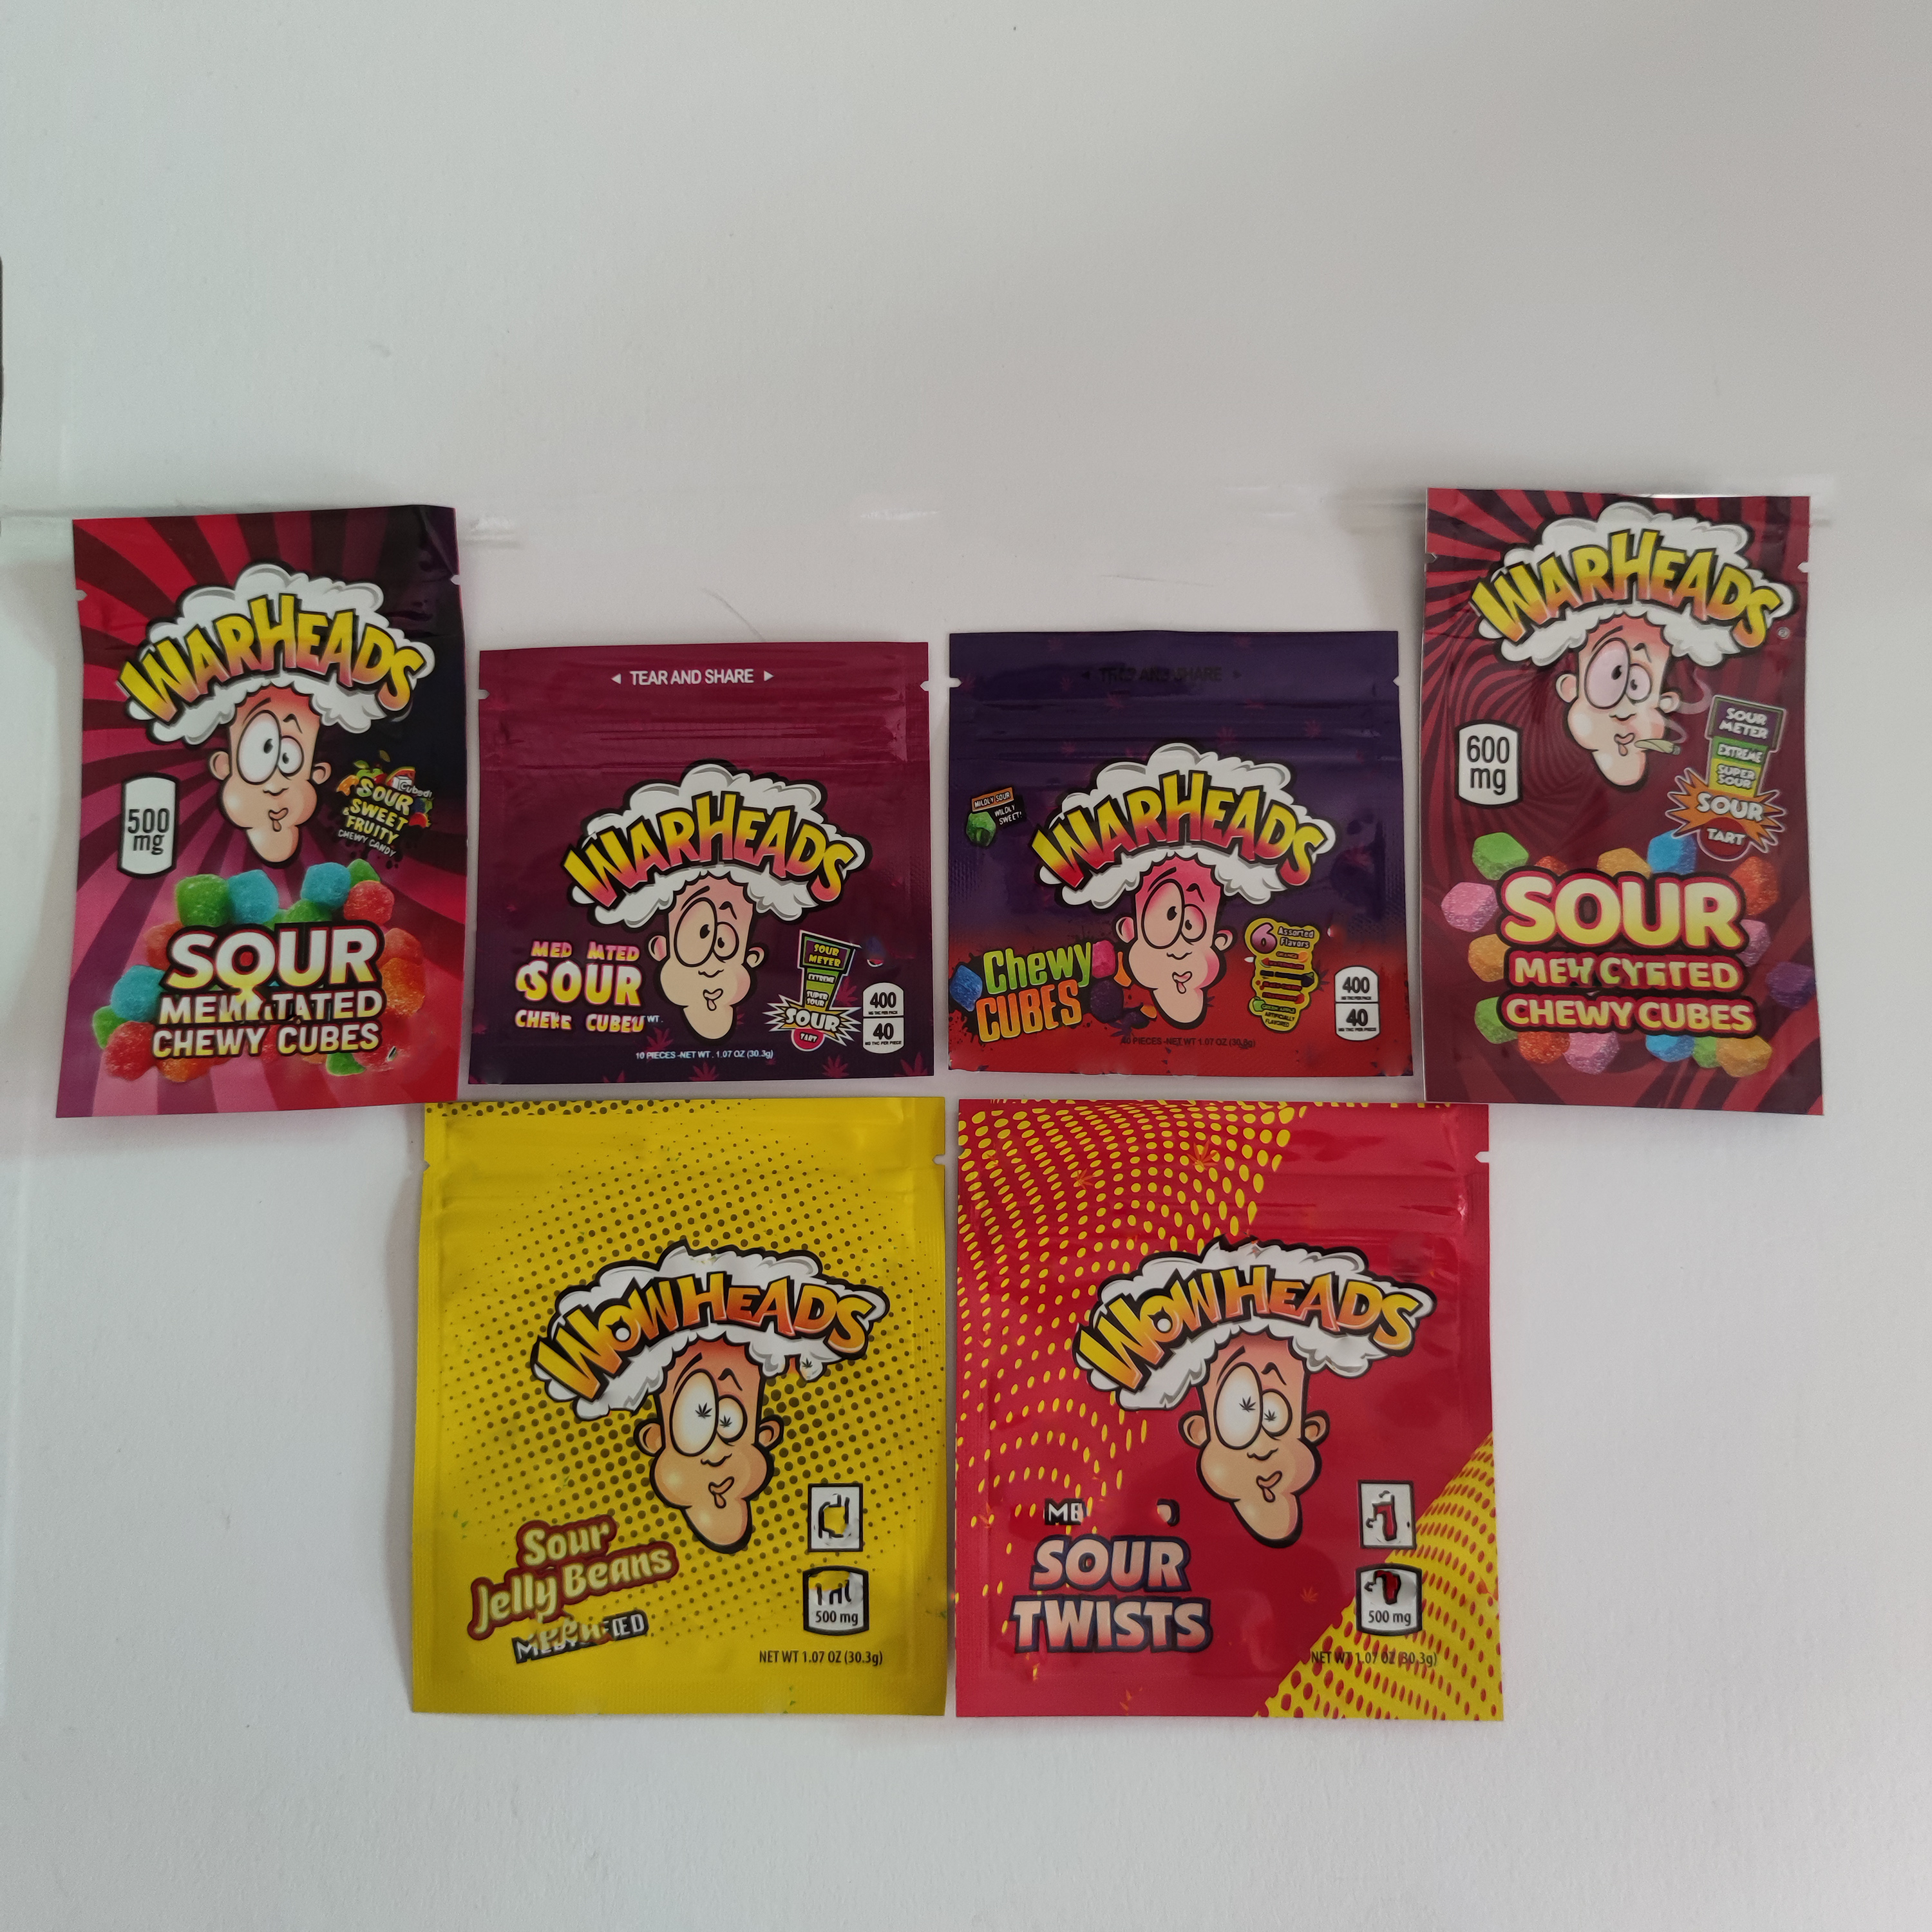 Warheads Pouch Sour Bag Edibles Gummies Mylar Storage Package Packing Bags Wowheads Jelly Beans Smell Proof Child Gummy Chewy Cubes Packaging от DHgate WW